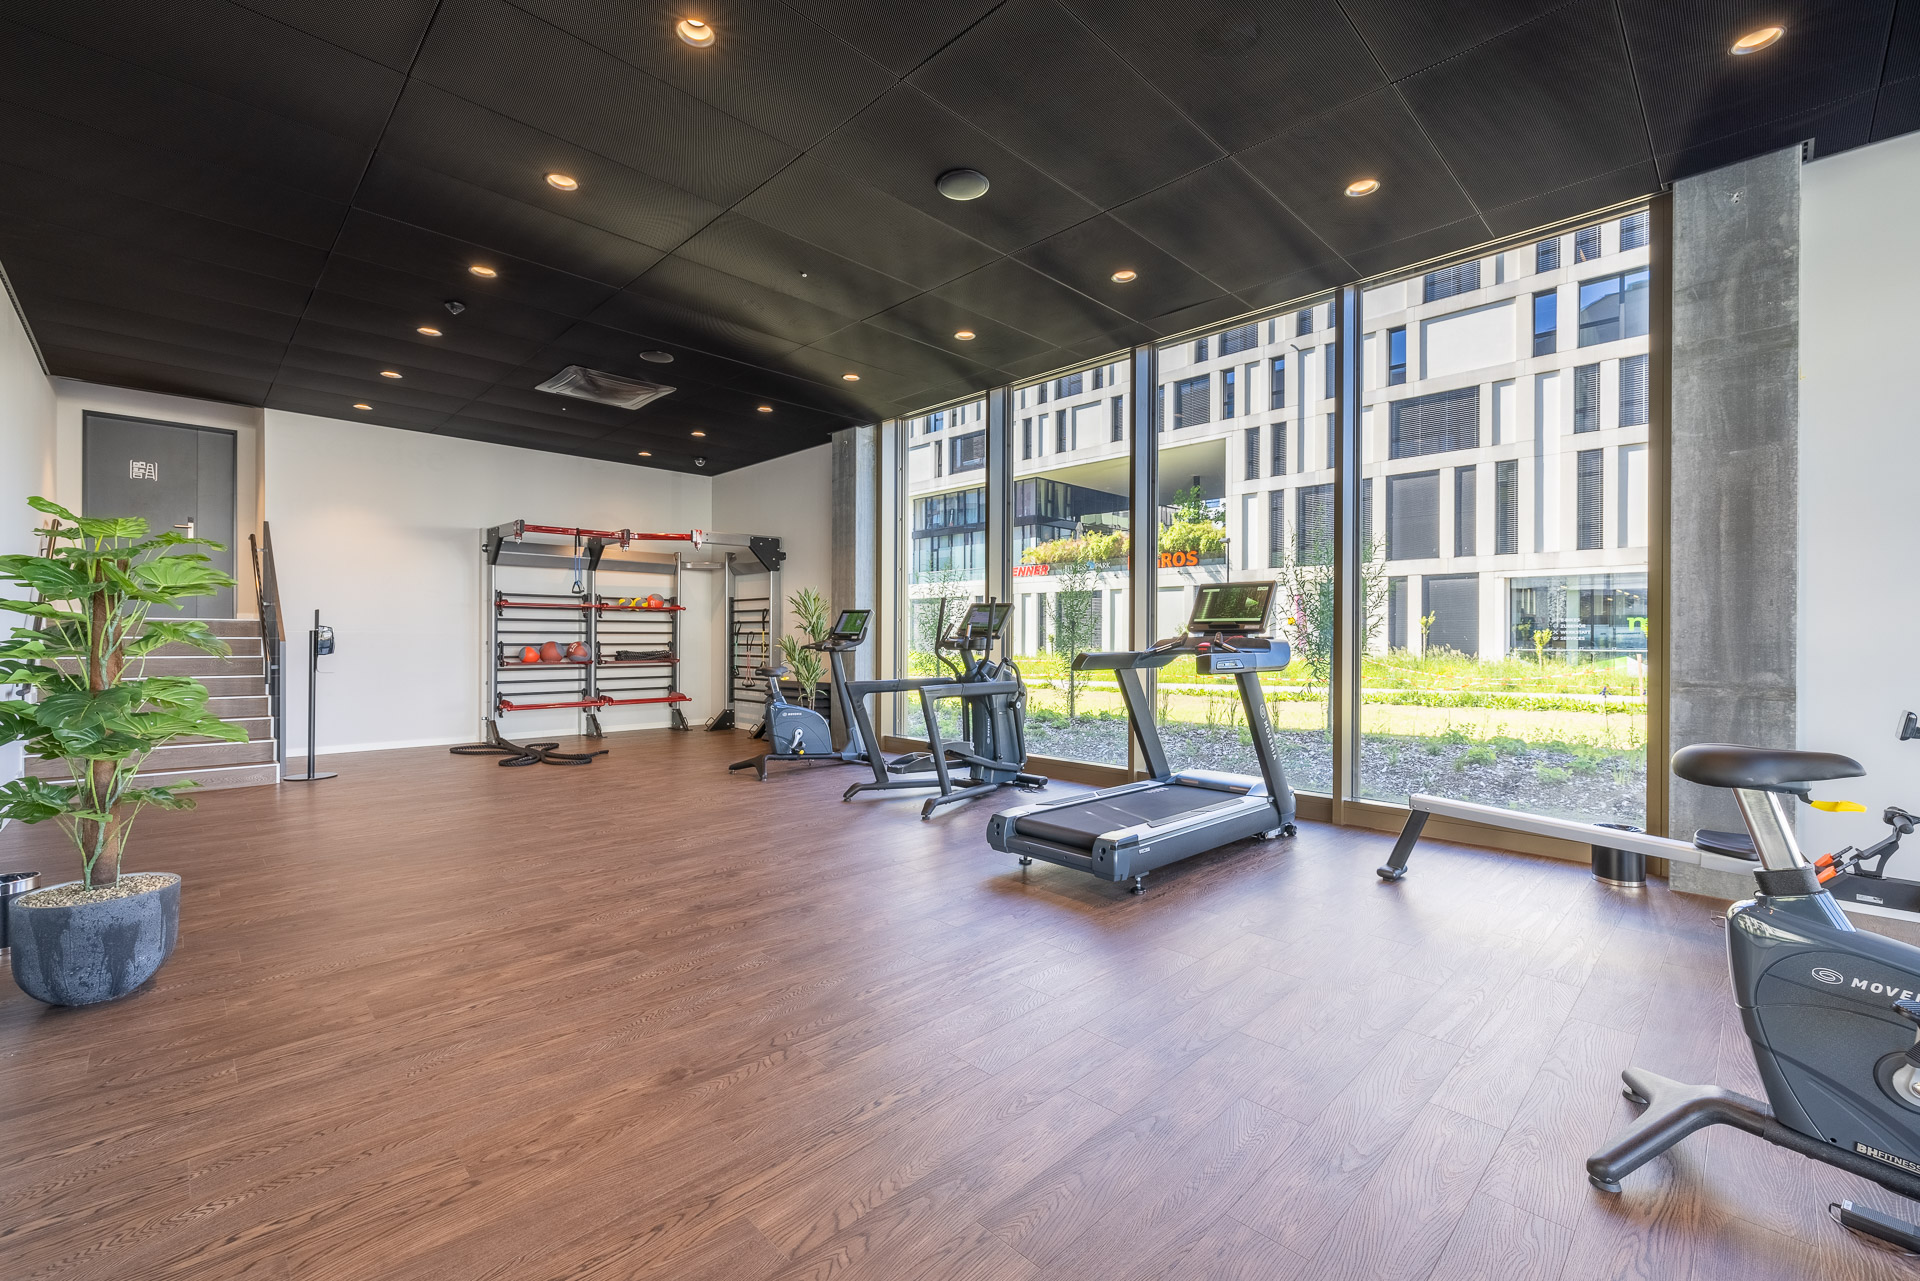 The fitness area with some equipment at JOYN Zurich